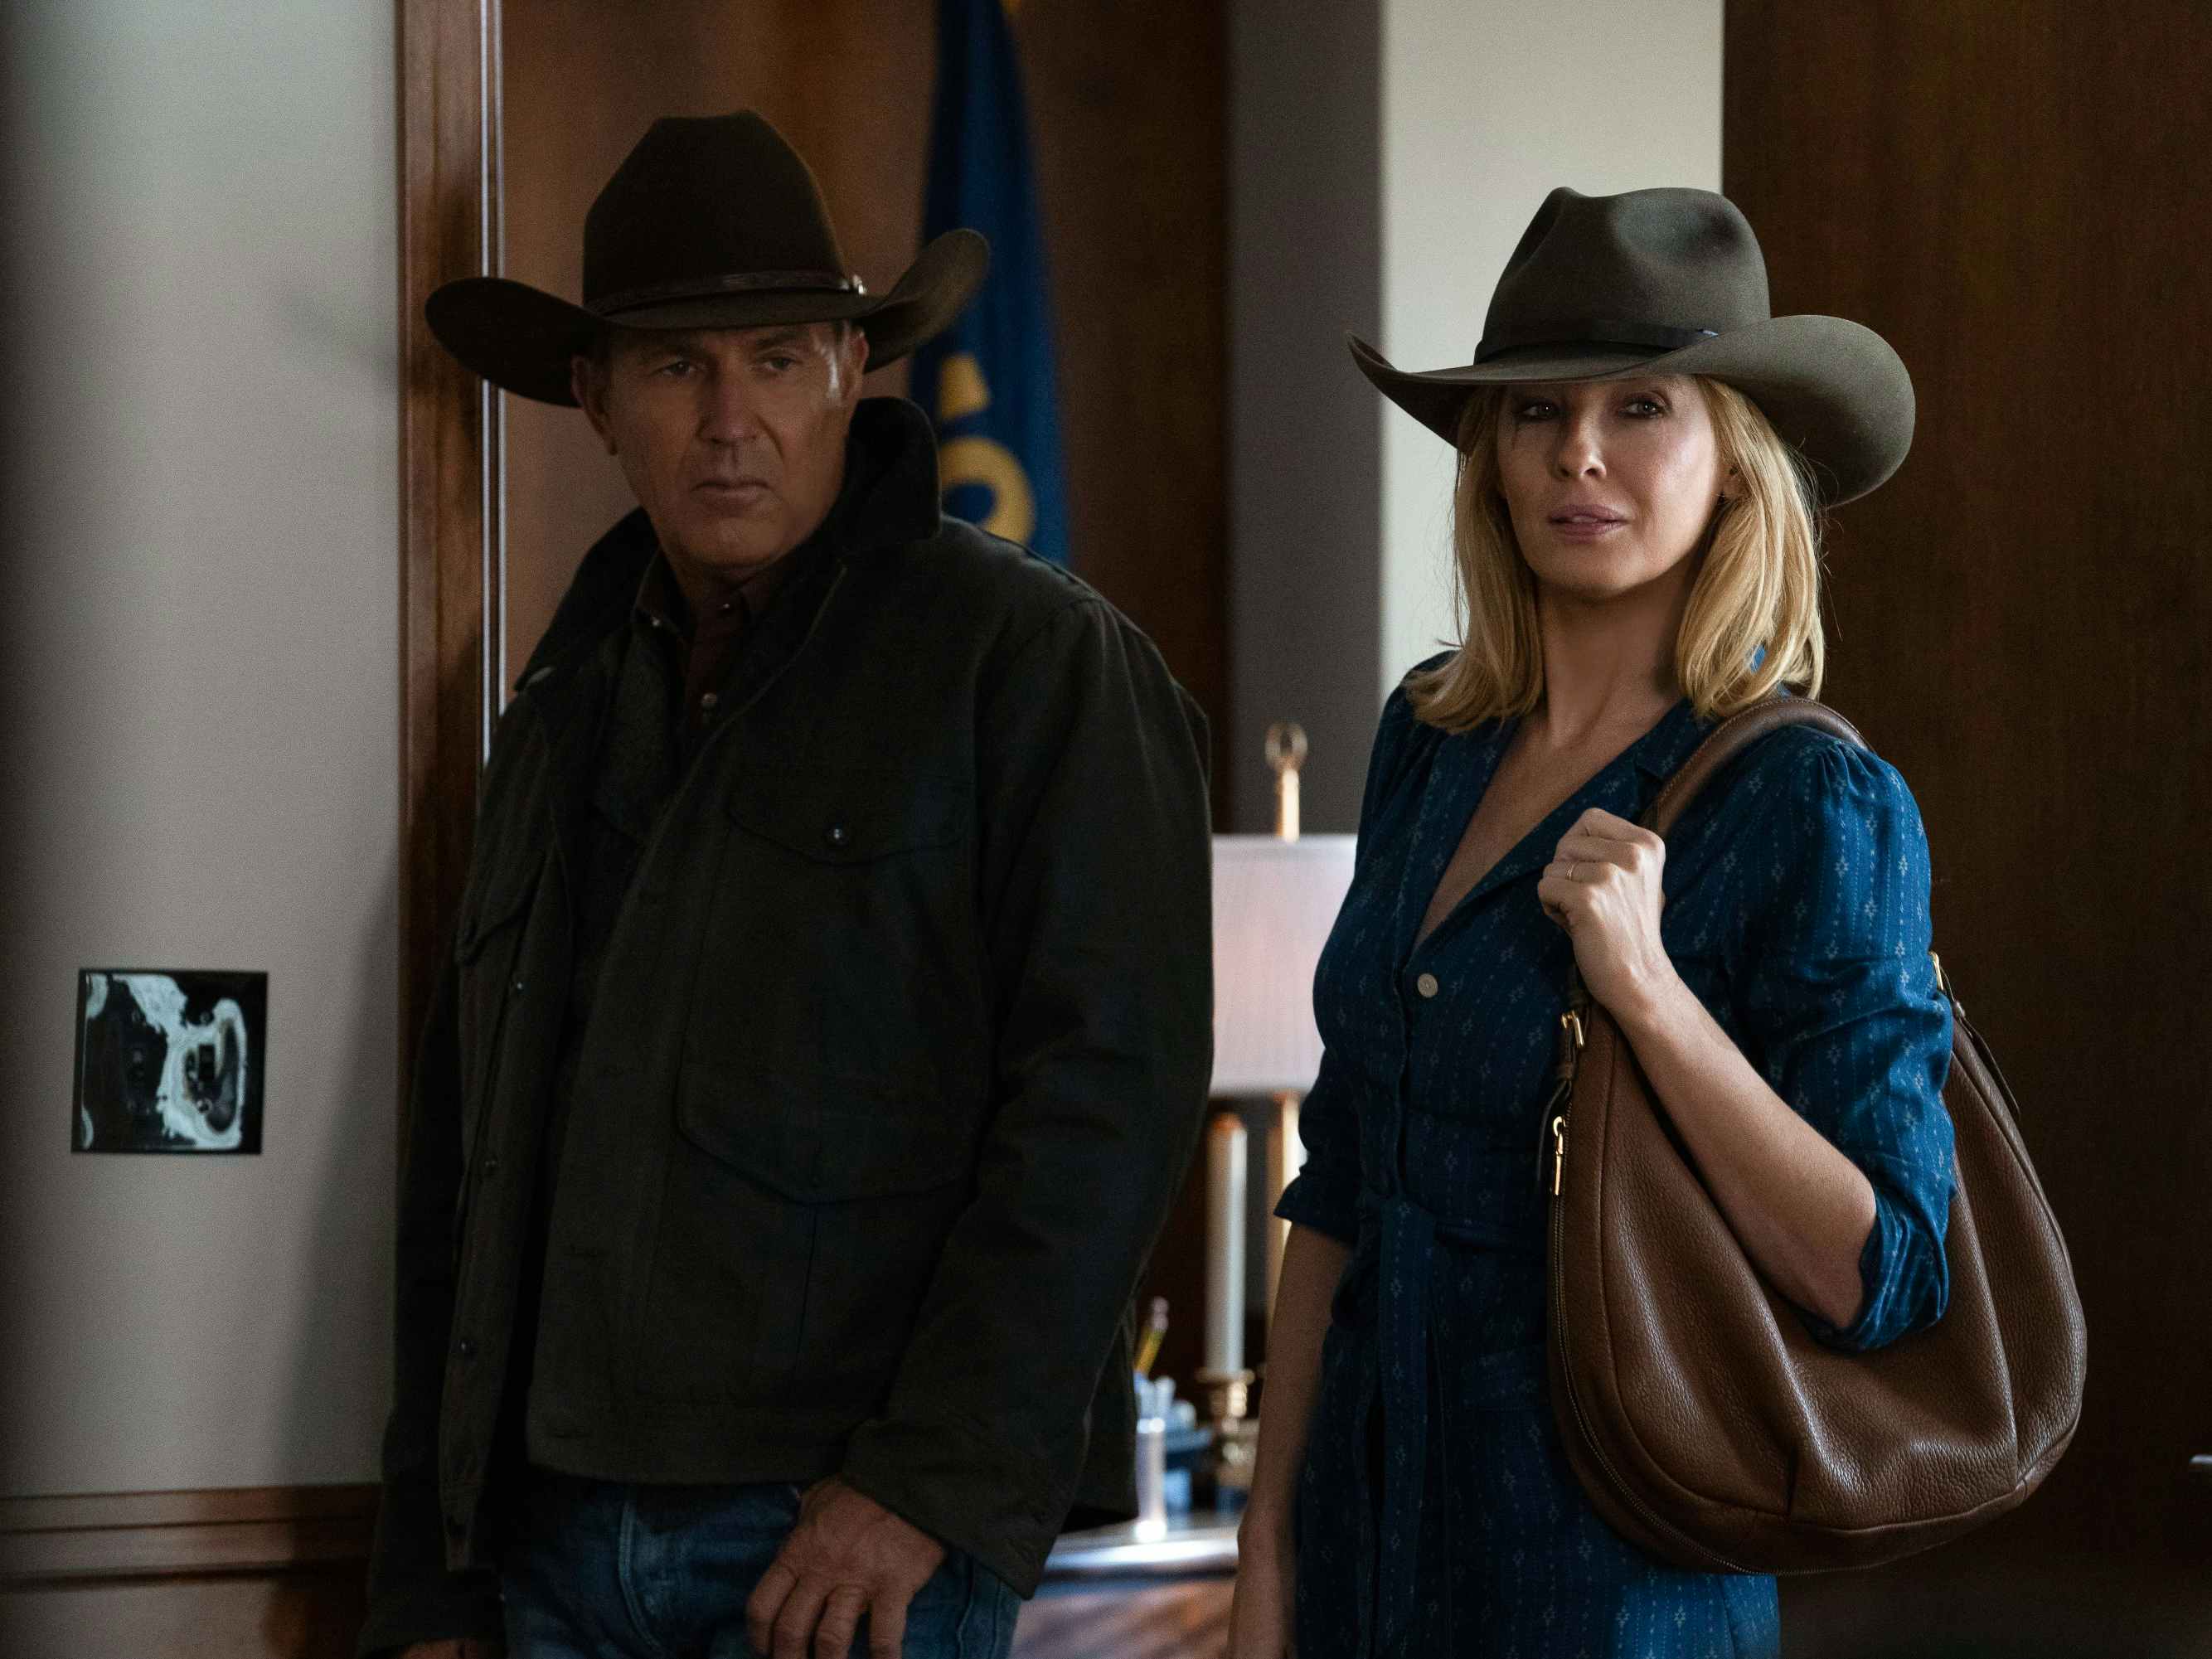 A still from an episode of Yellowstone with two cast members standing in a doorway.